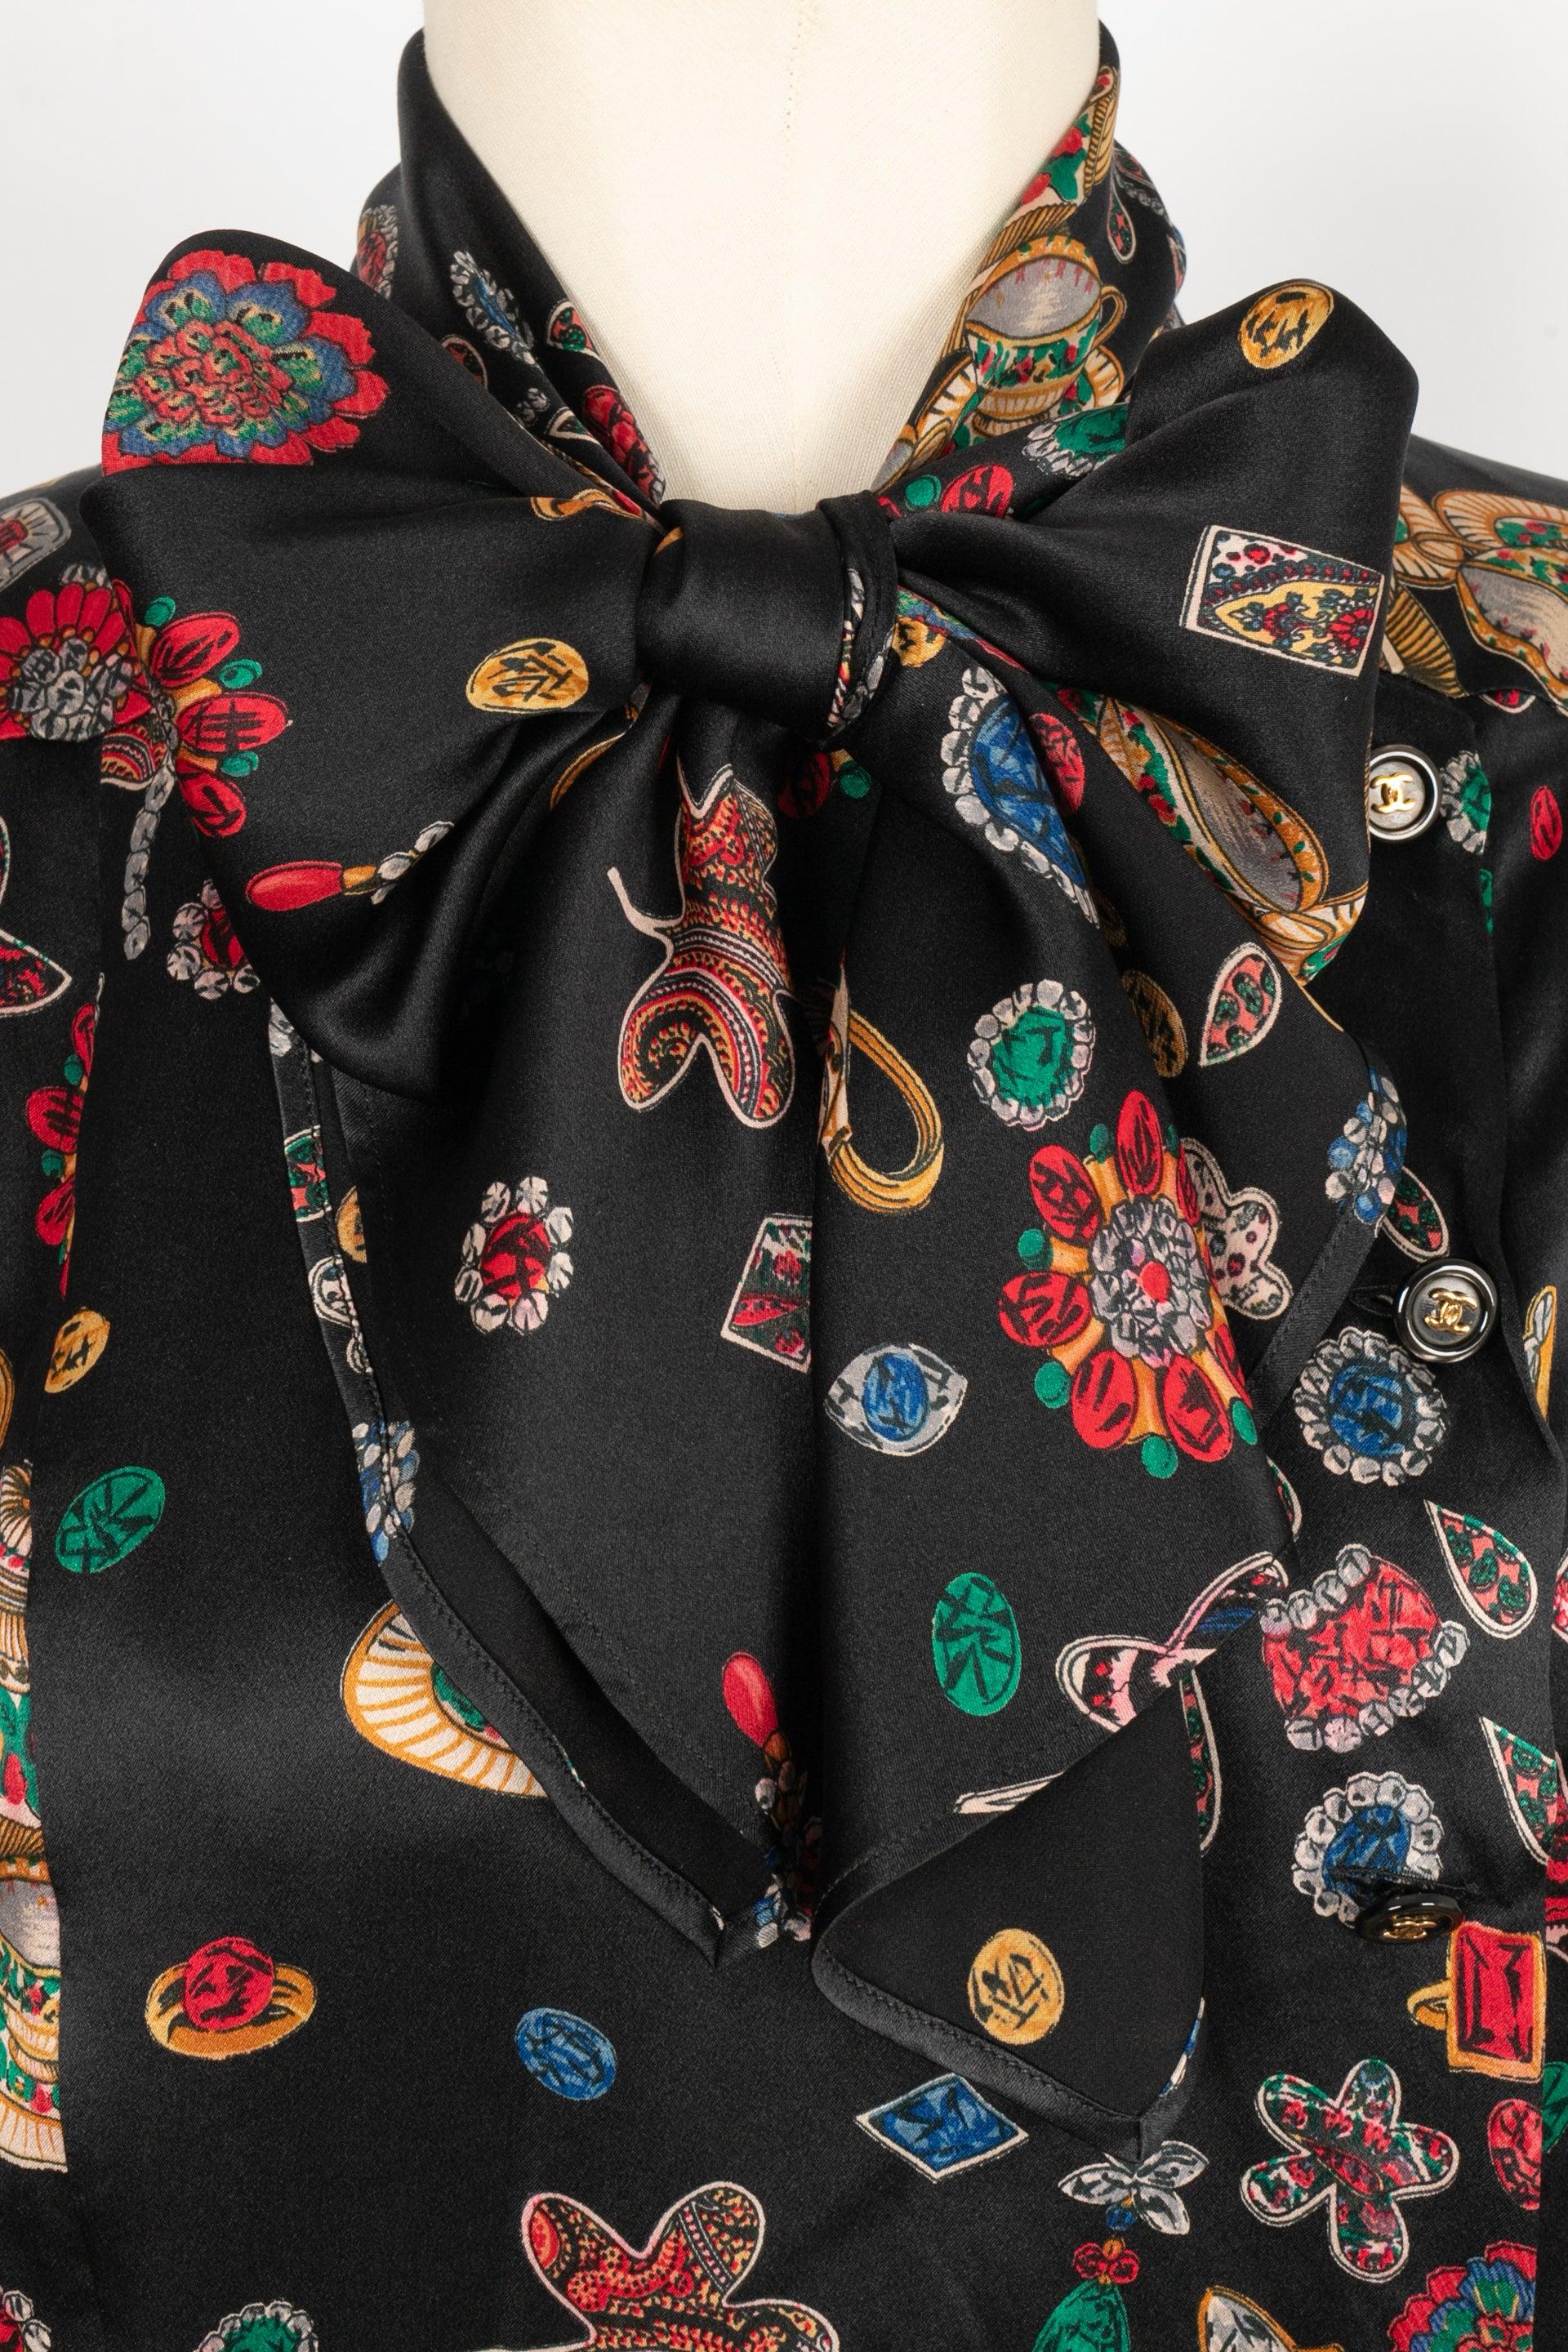 Chanel Black Silk Shirt / Top With Printed with Jewels, 1990s For Sale 2